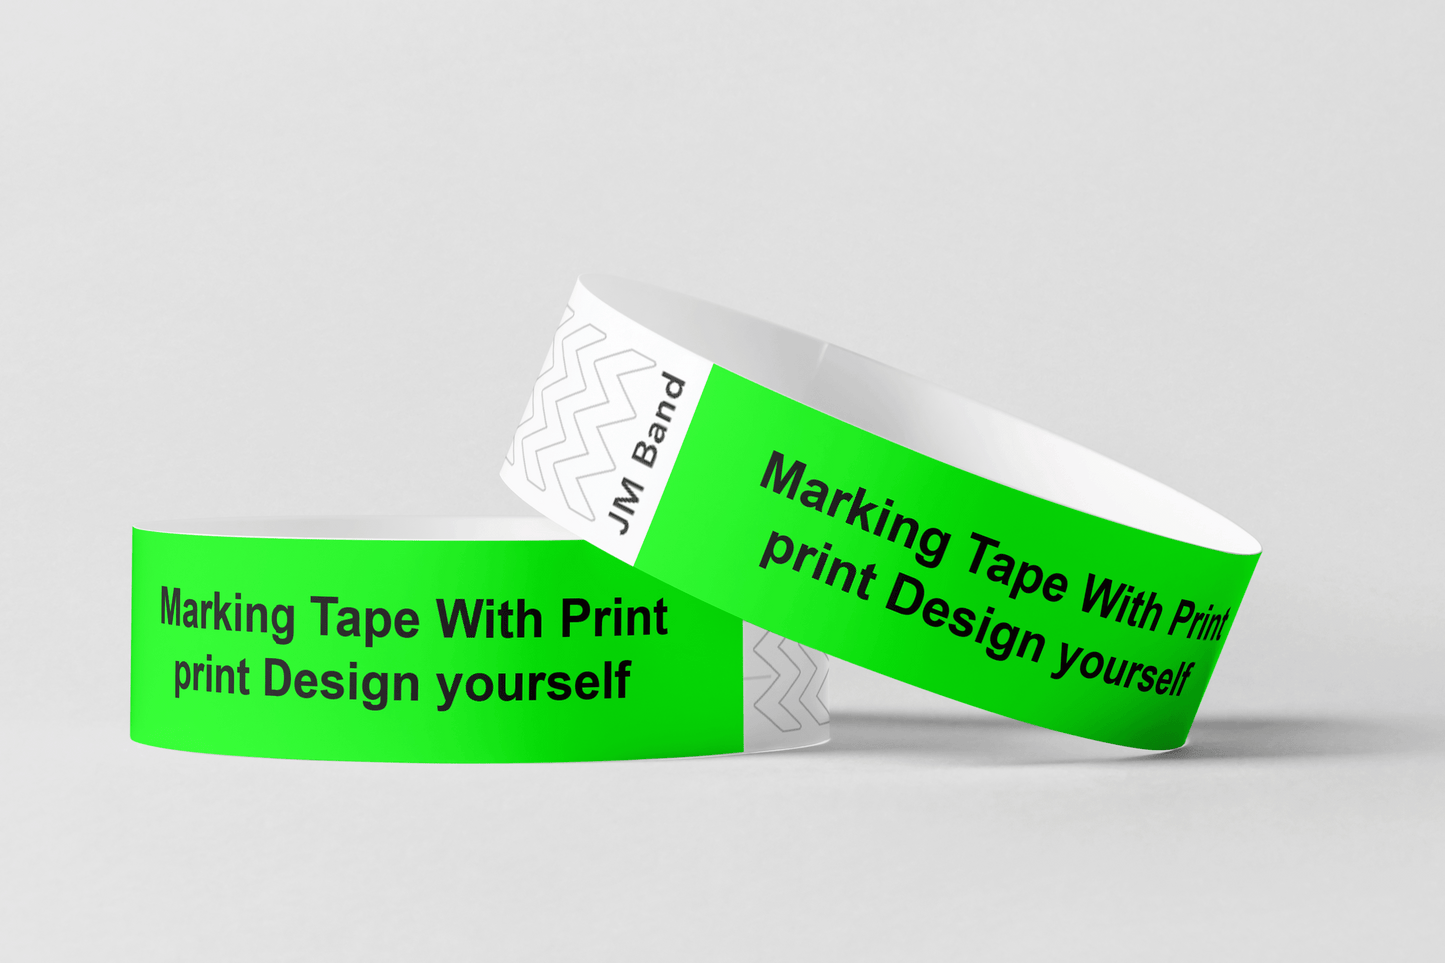 Marking Tape With Print Paper wristbands JM Band UK 10 Green 